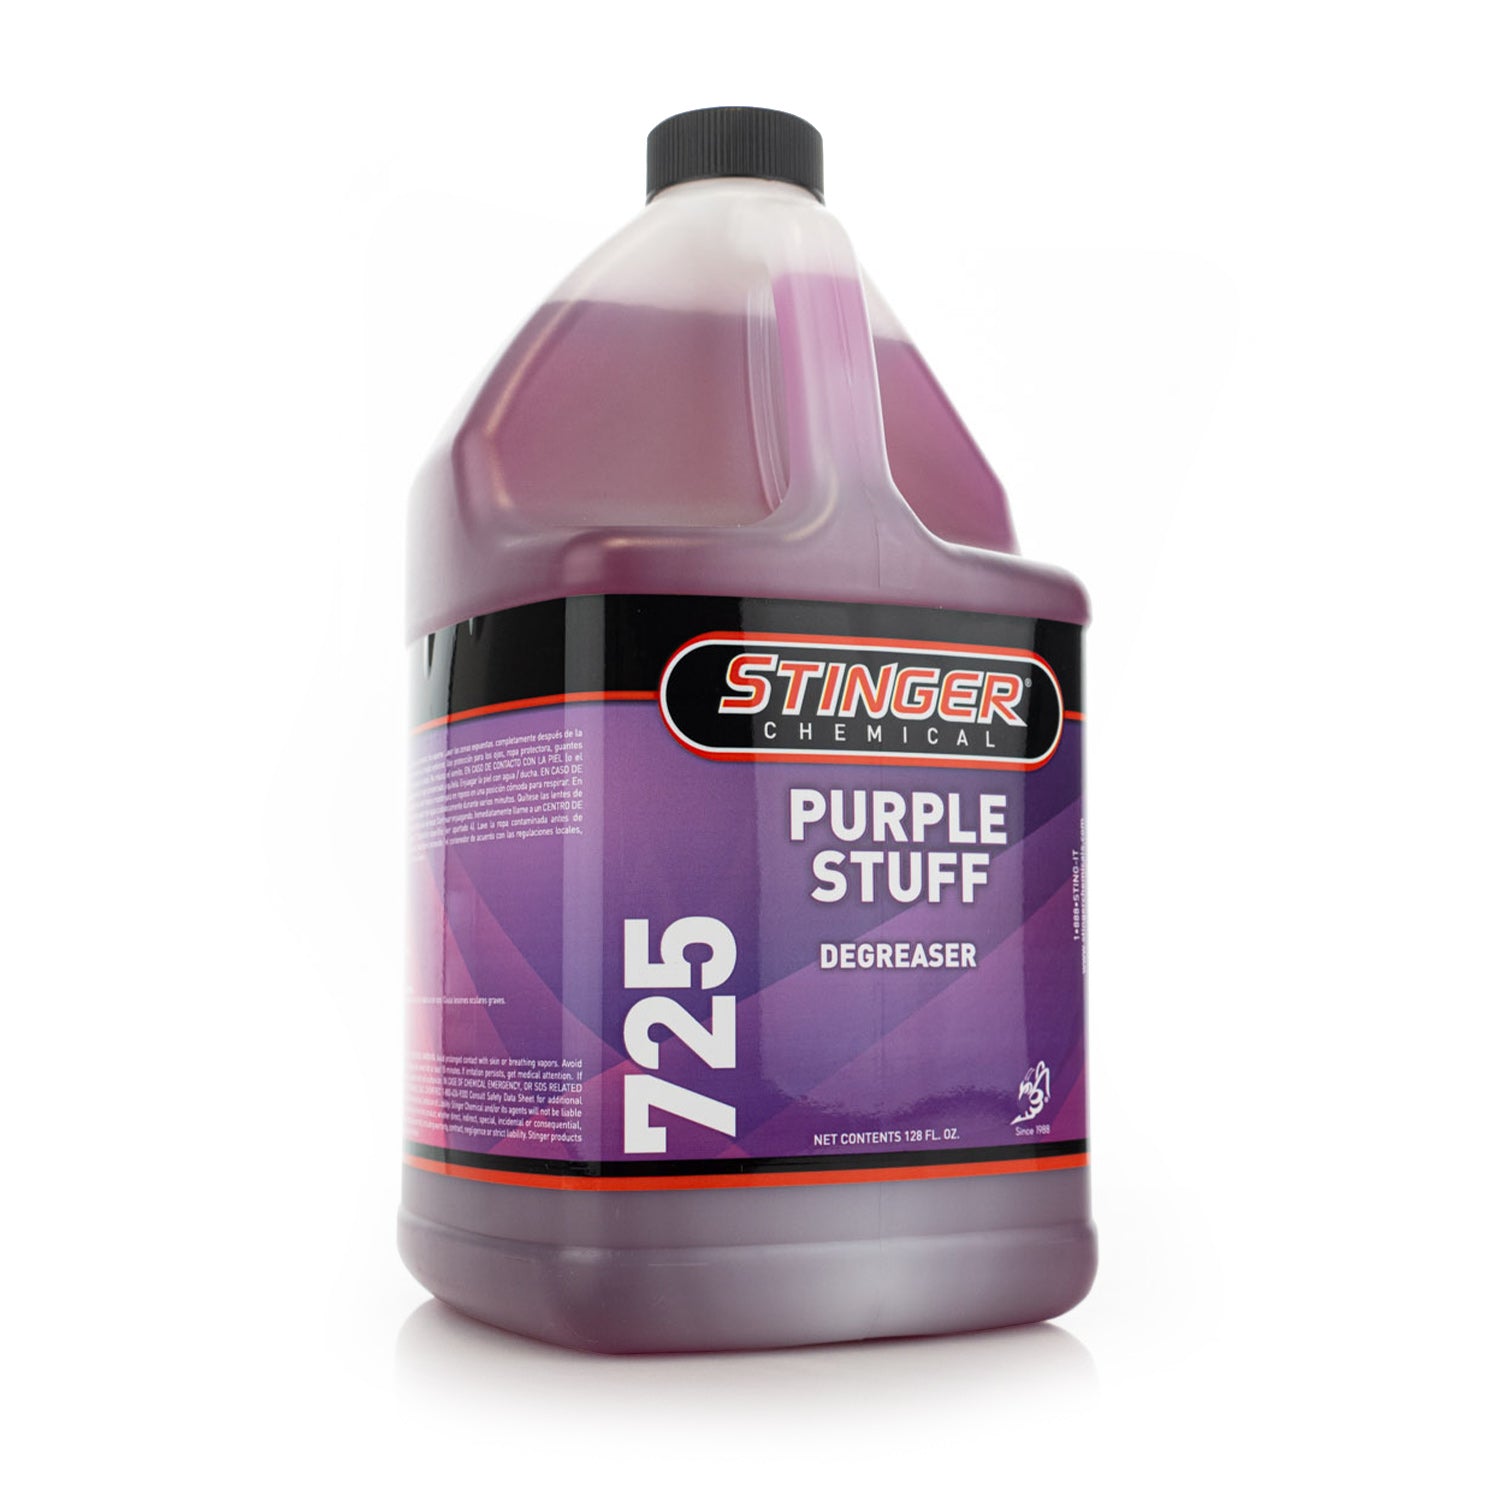 Purple Power Industrial Strength Cleaner/Degreaser (55 Gallon